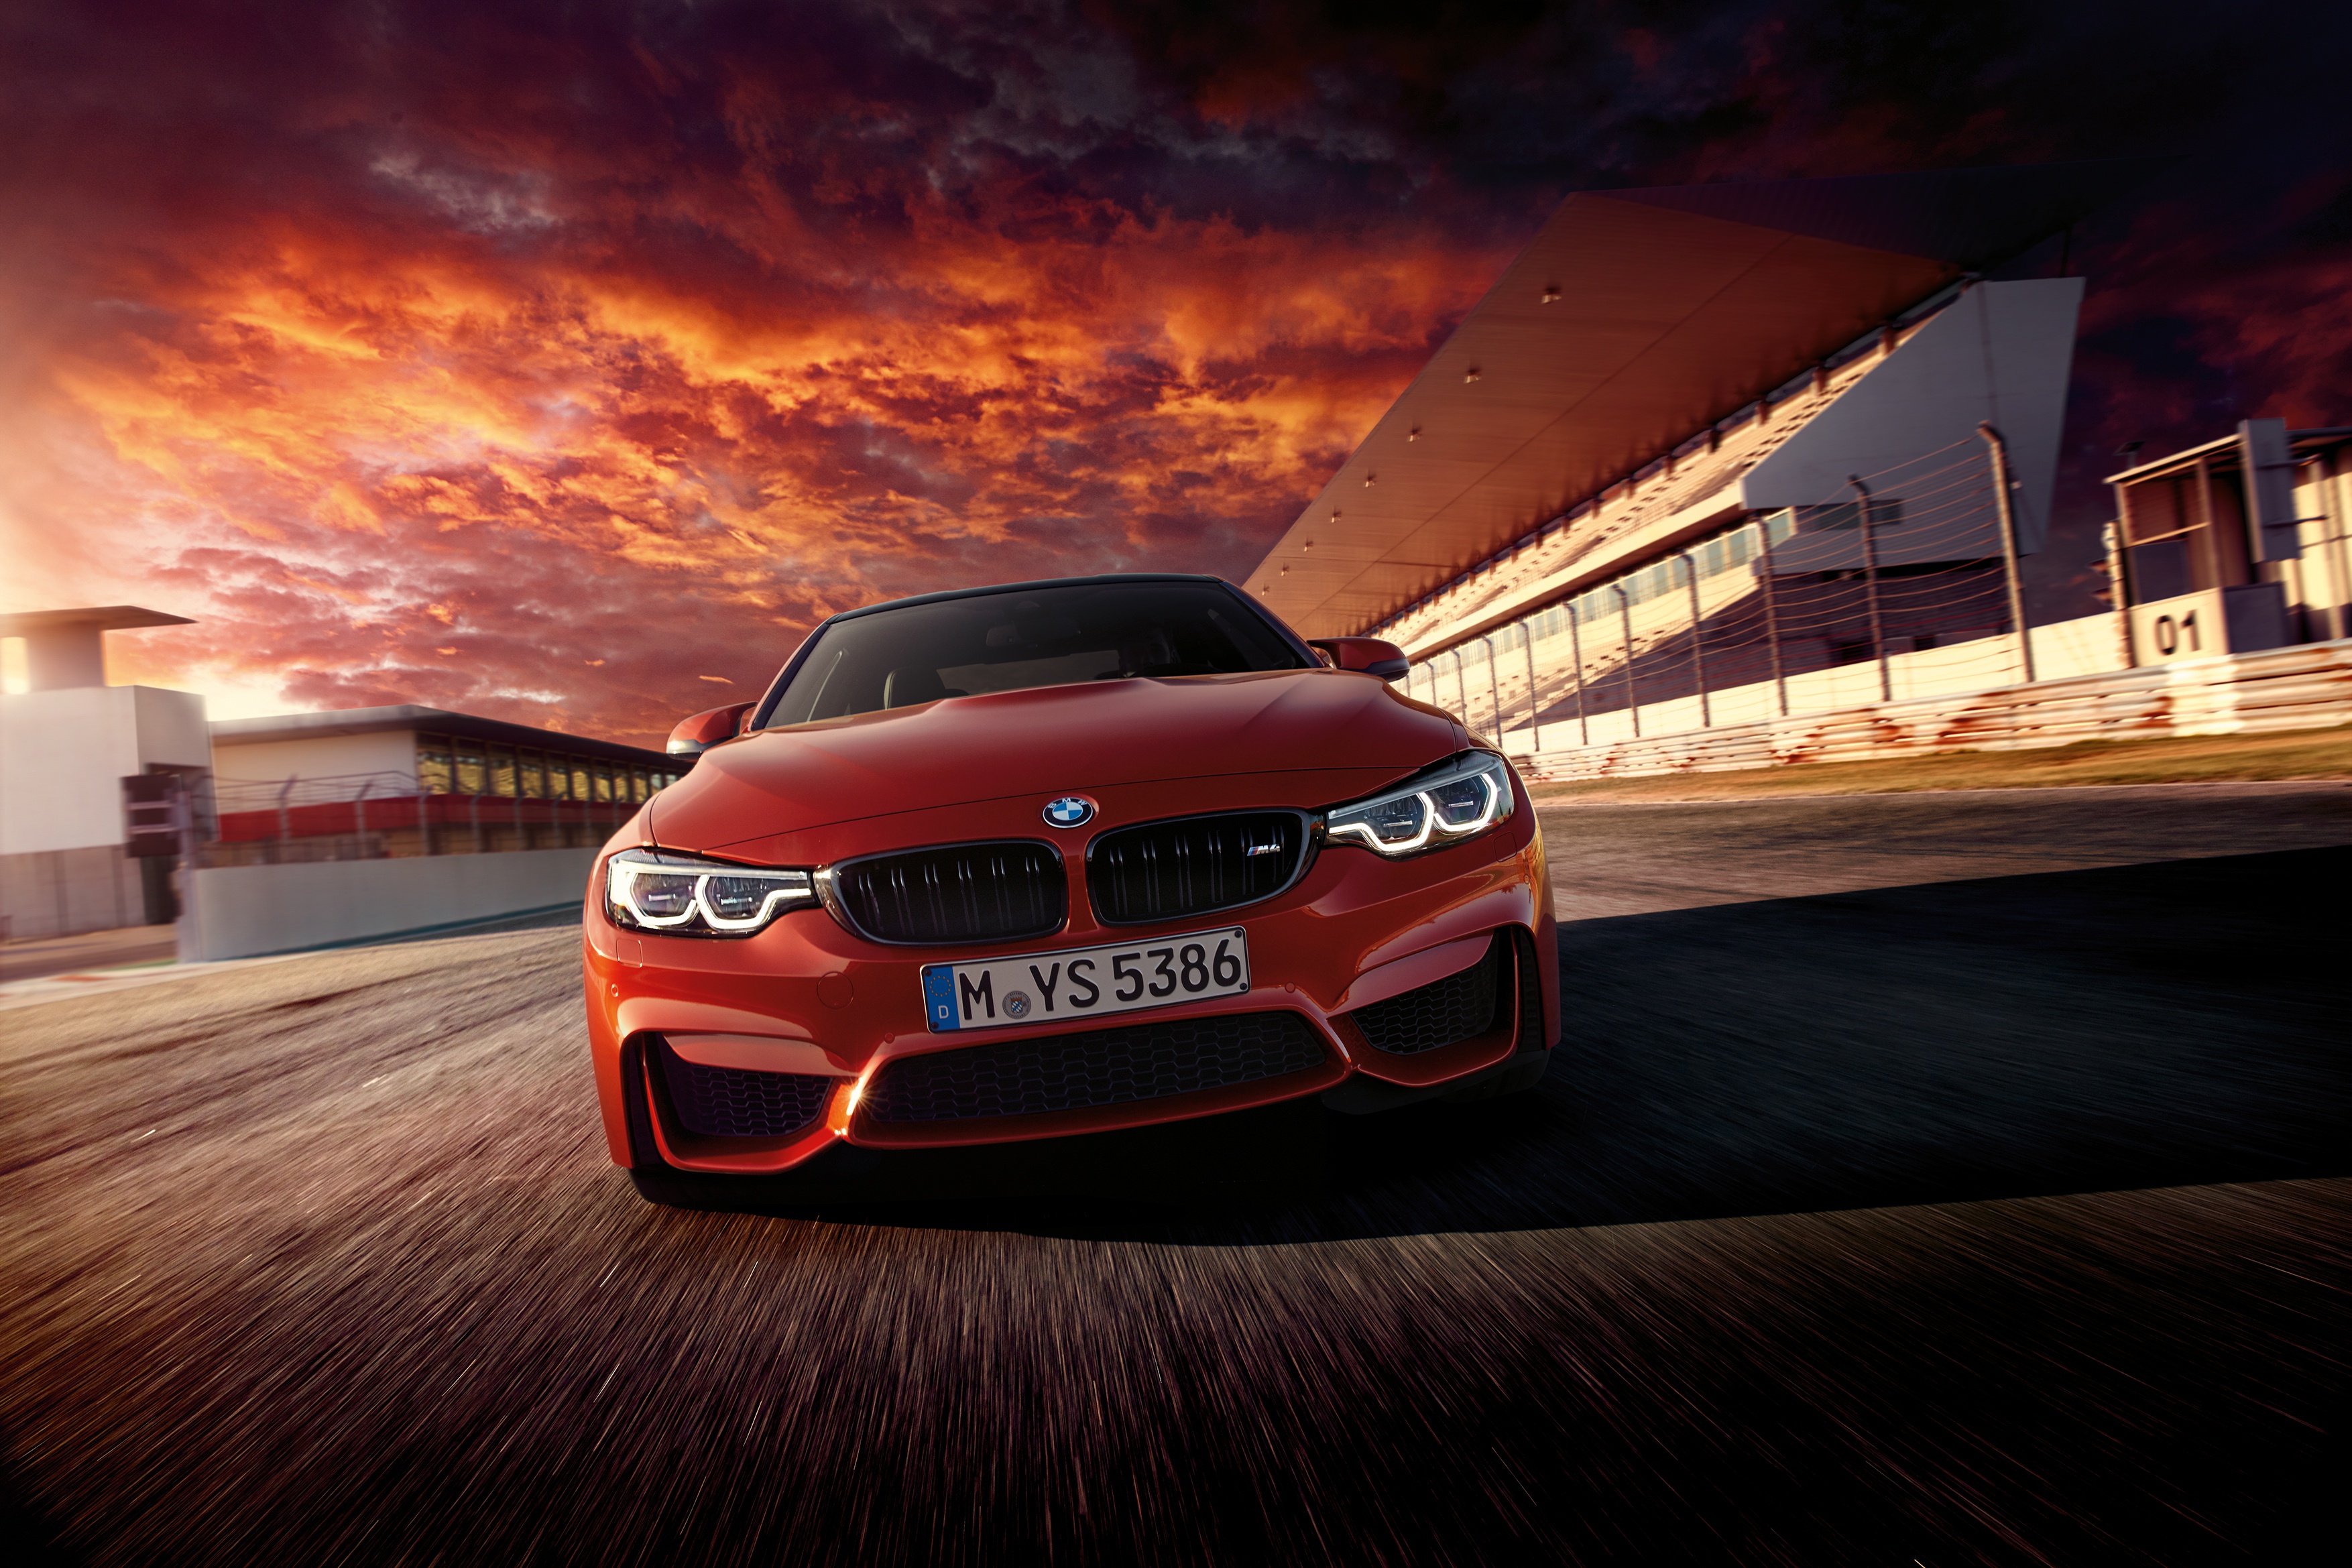 car, orange car, bmw, vehicles collection of HD images